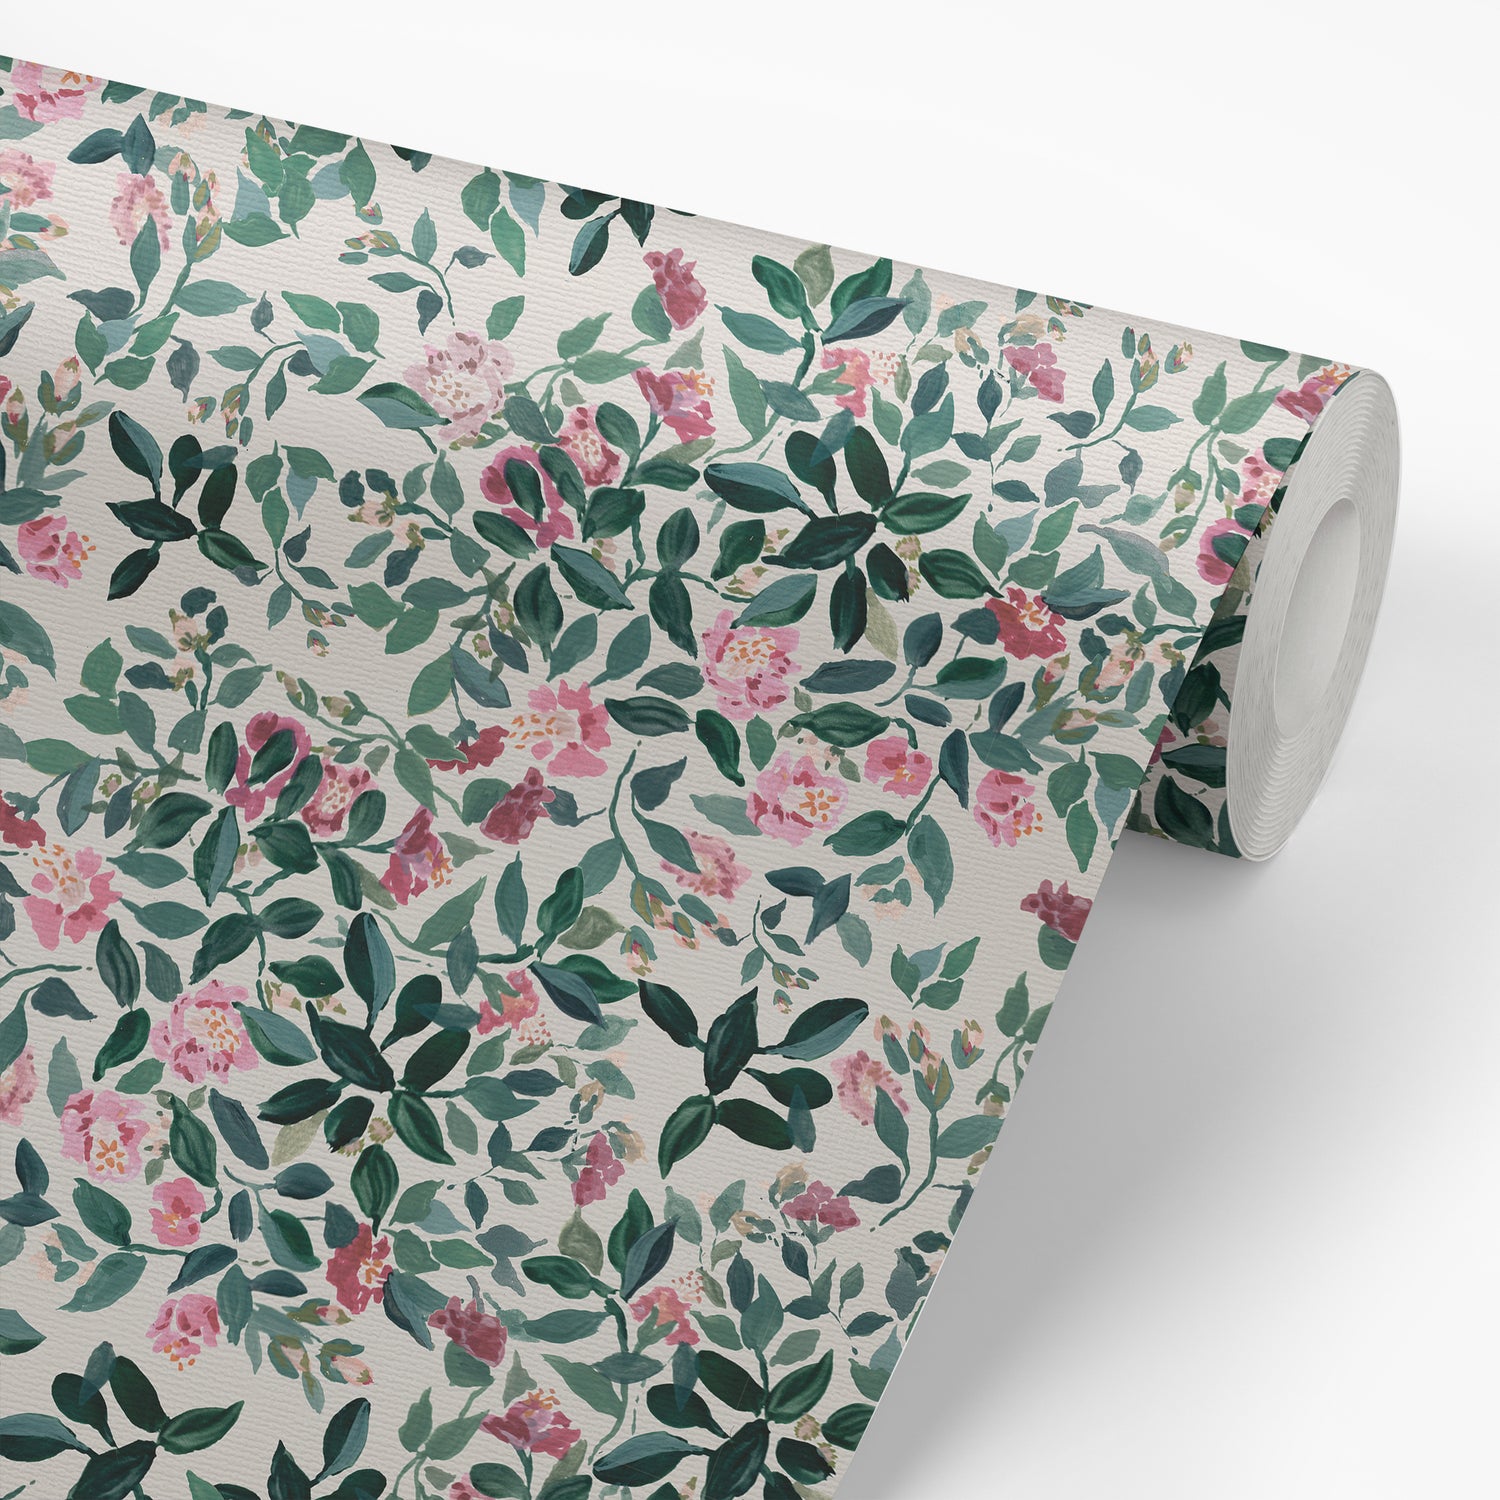 Wallpaper panel featuring Jackie O'Bosky's Camiella Wallpaper - a floral pattern